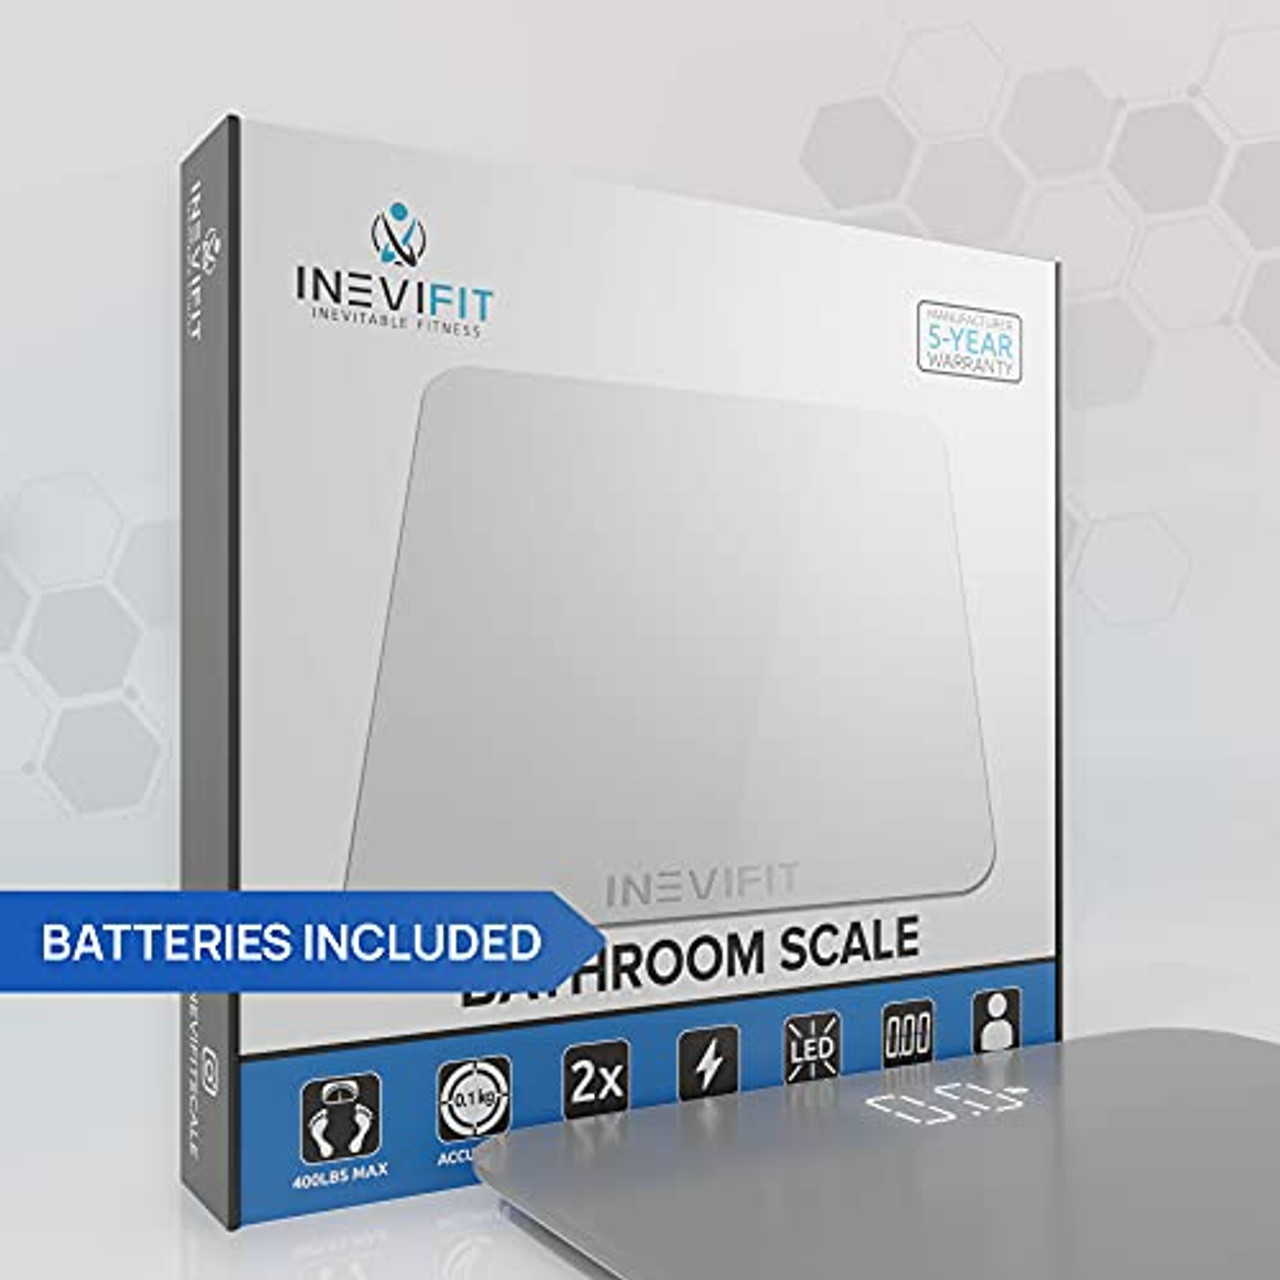 INEVIFIT Bathroom Scale, Highly Accurate Digital Bathroom Body Scale,  Measures Weight up to 400 lbs. Includes Batteries BALCK